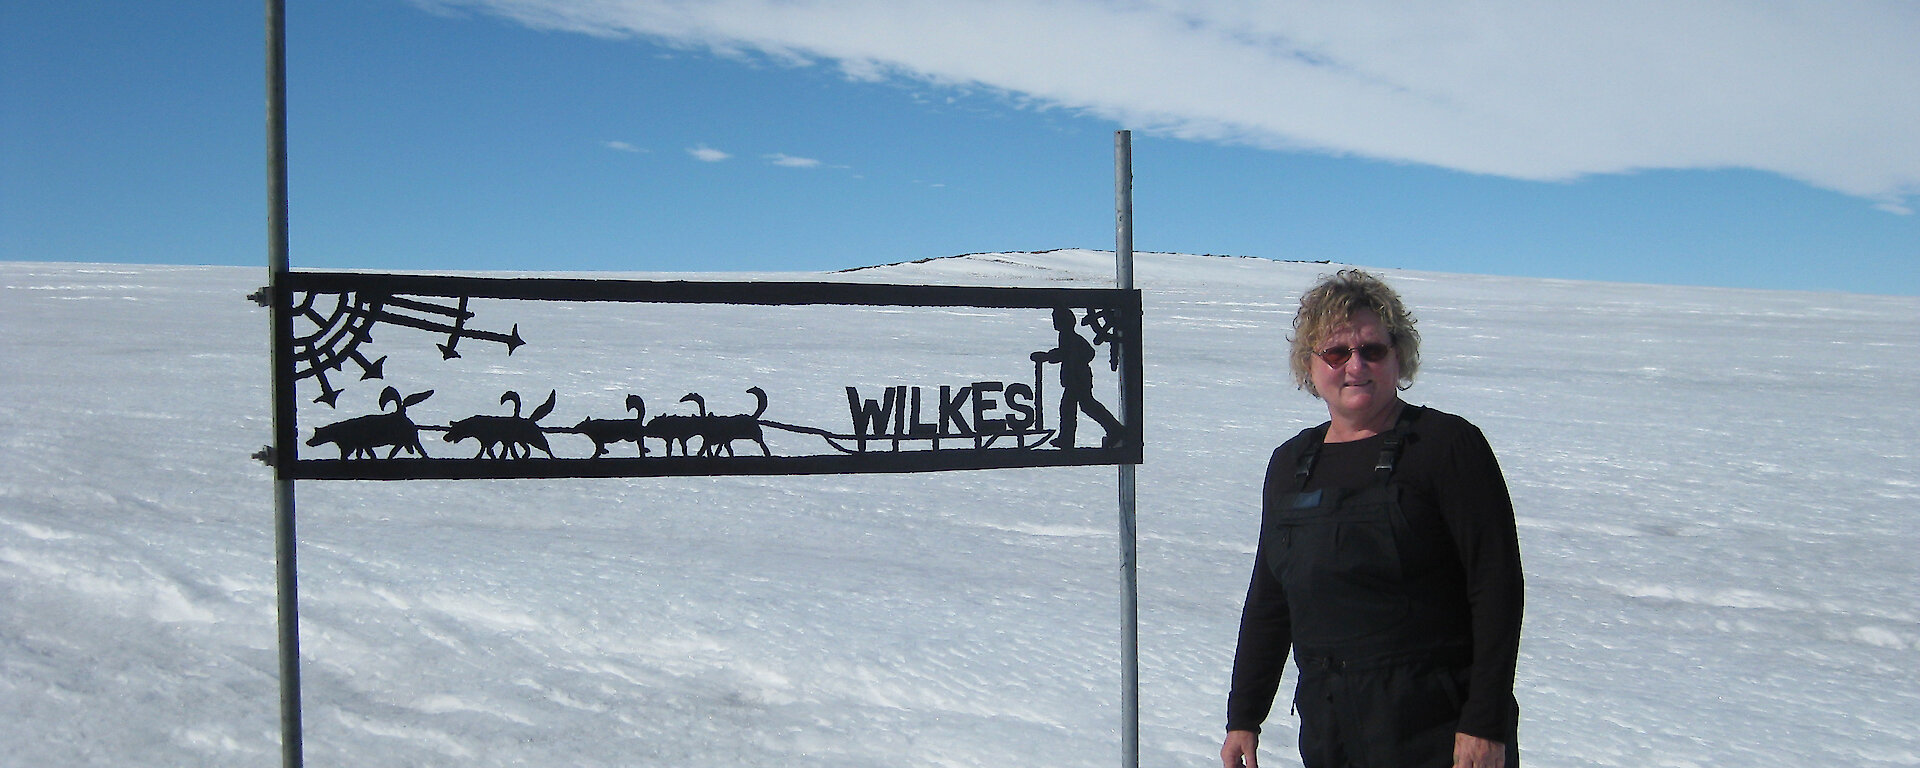 Lyn Maddock beside sign for Wilkes station